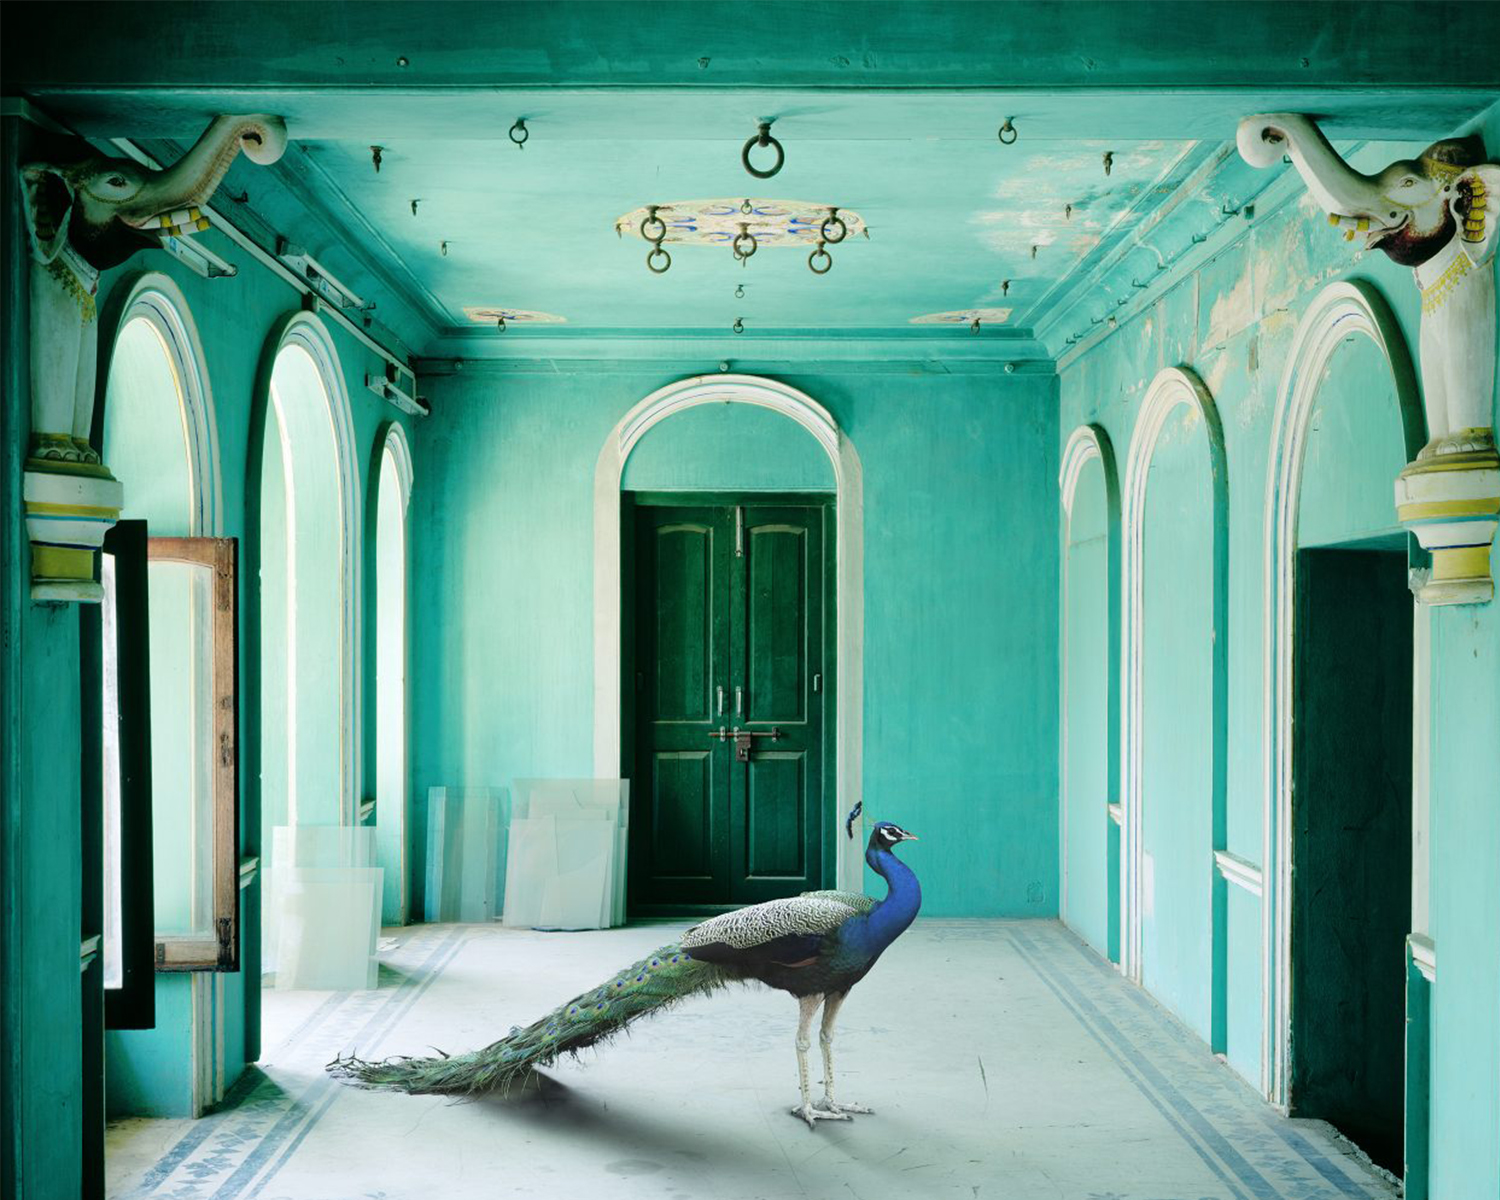 A composite photograph of a peacock inside the aquamarine Queen’s Room in the Udaipur City Palace.